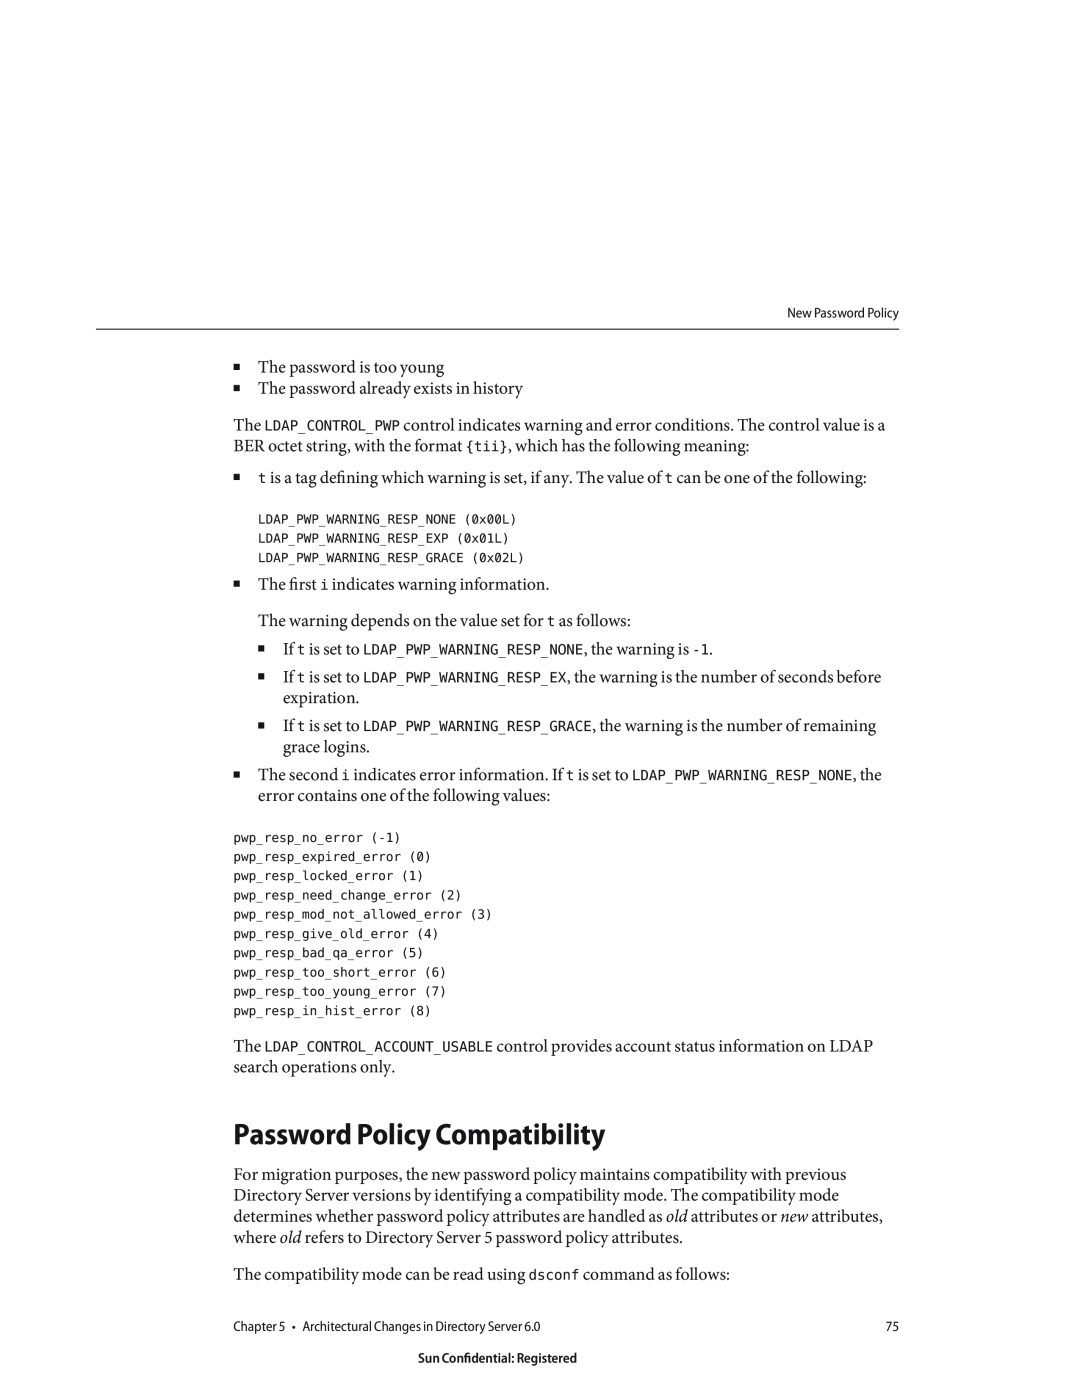 Sun Microsystems 8190994 manual Password Policy Compatibility 